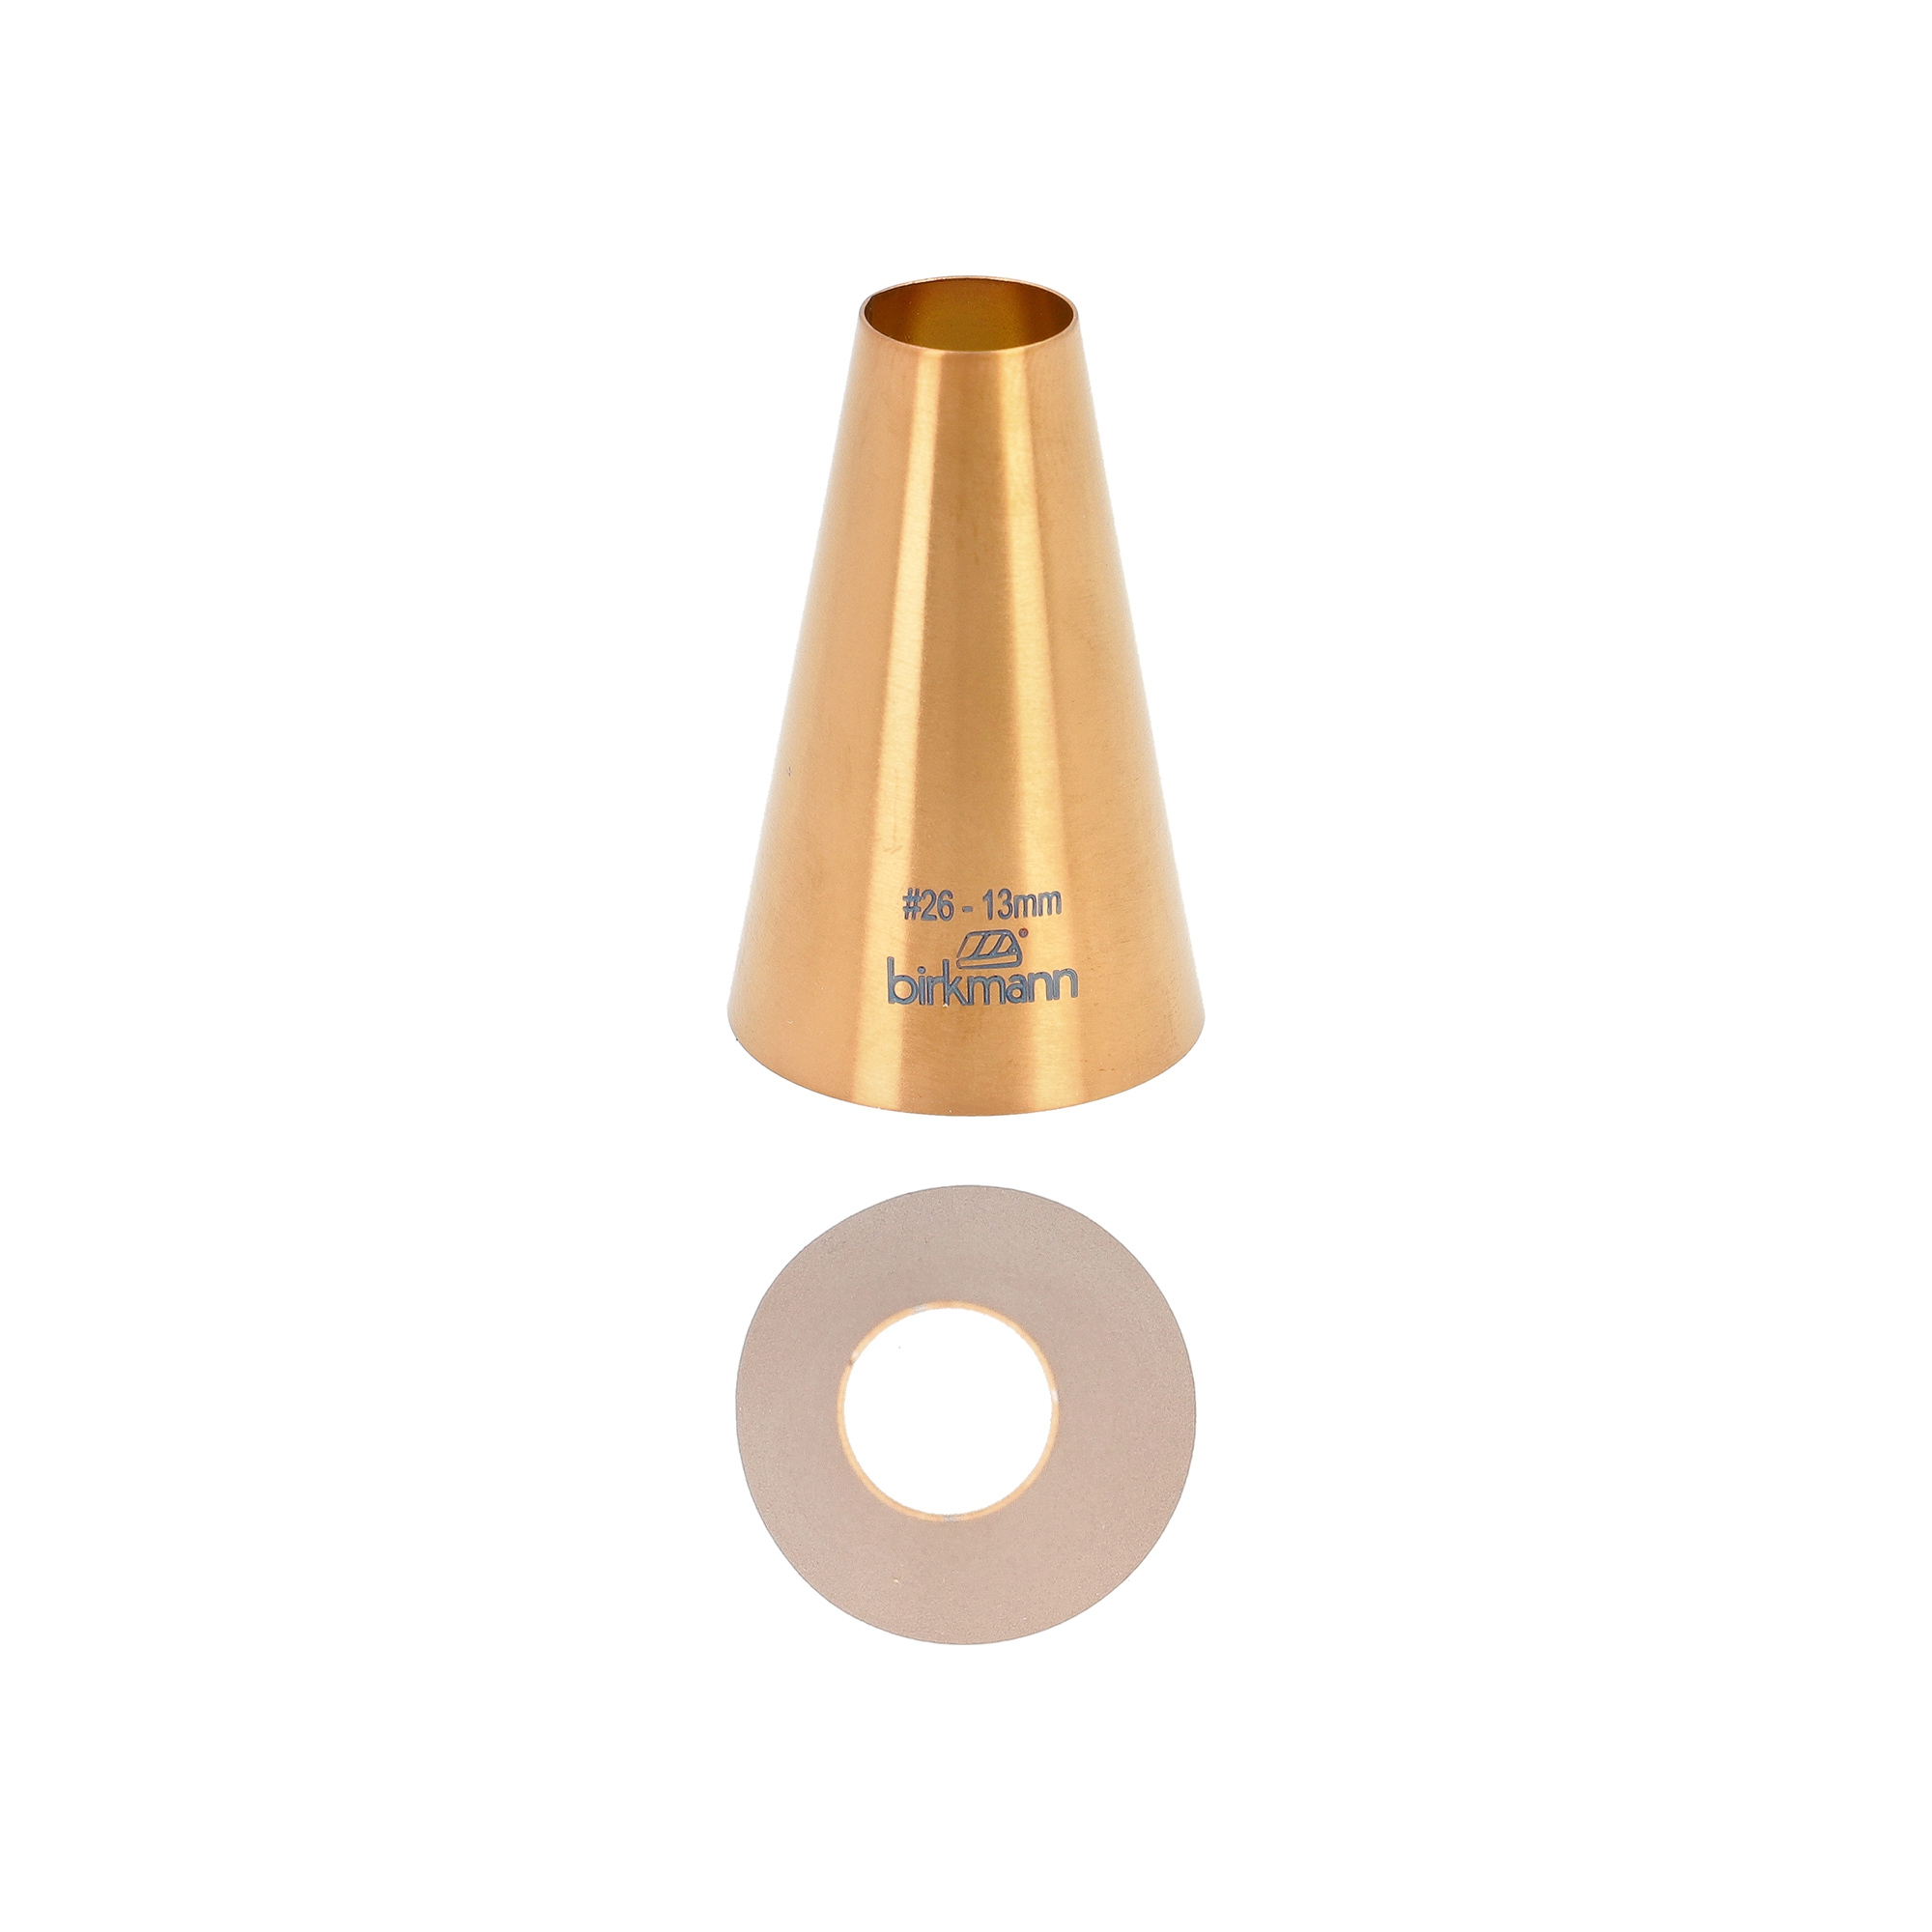 Birkmann - perforated nozzle copper colored #26 - 13mm